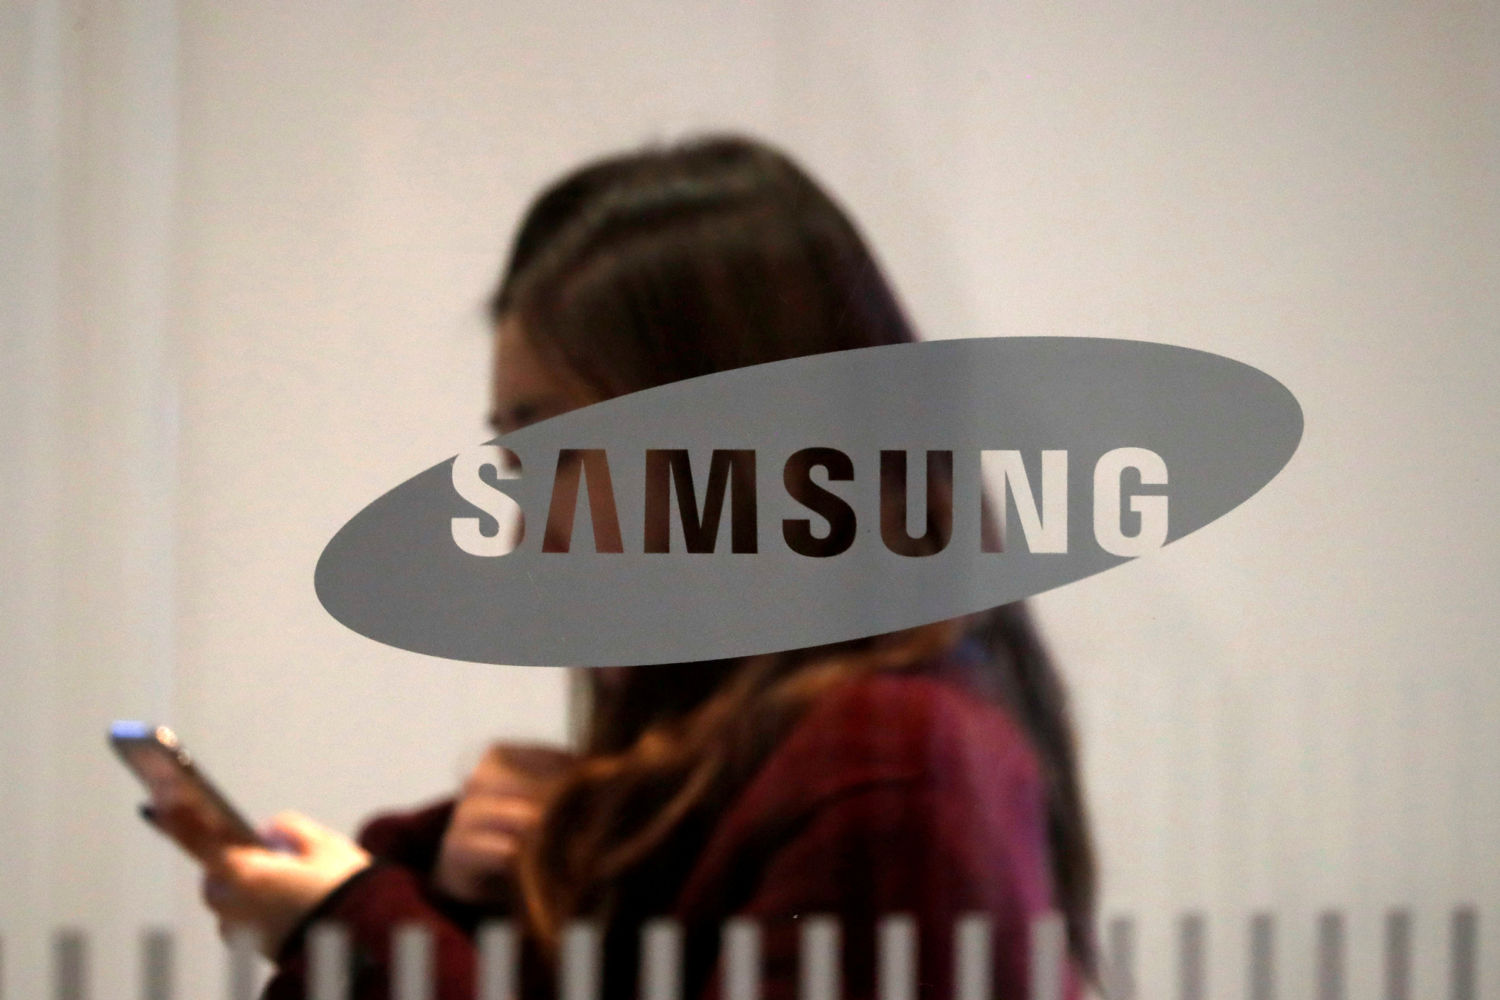 Smartphone, high-end consumer goods boost Samsung results